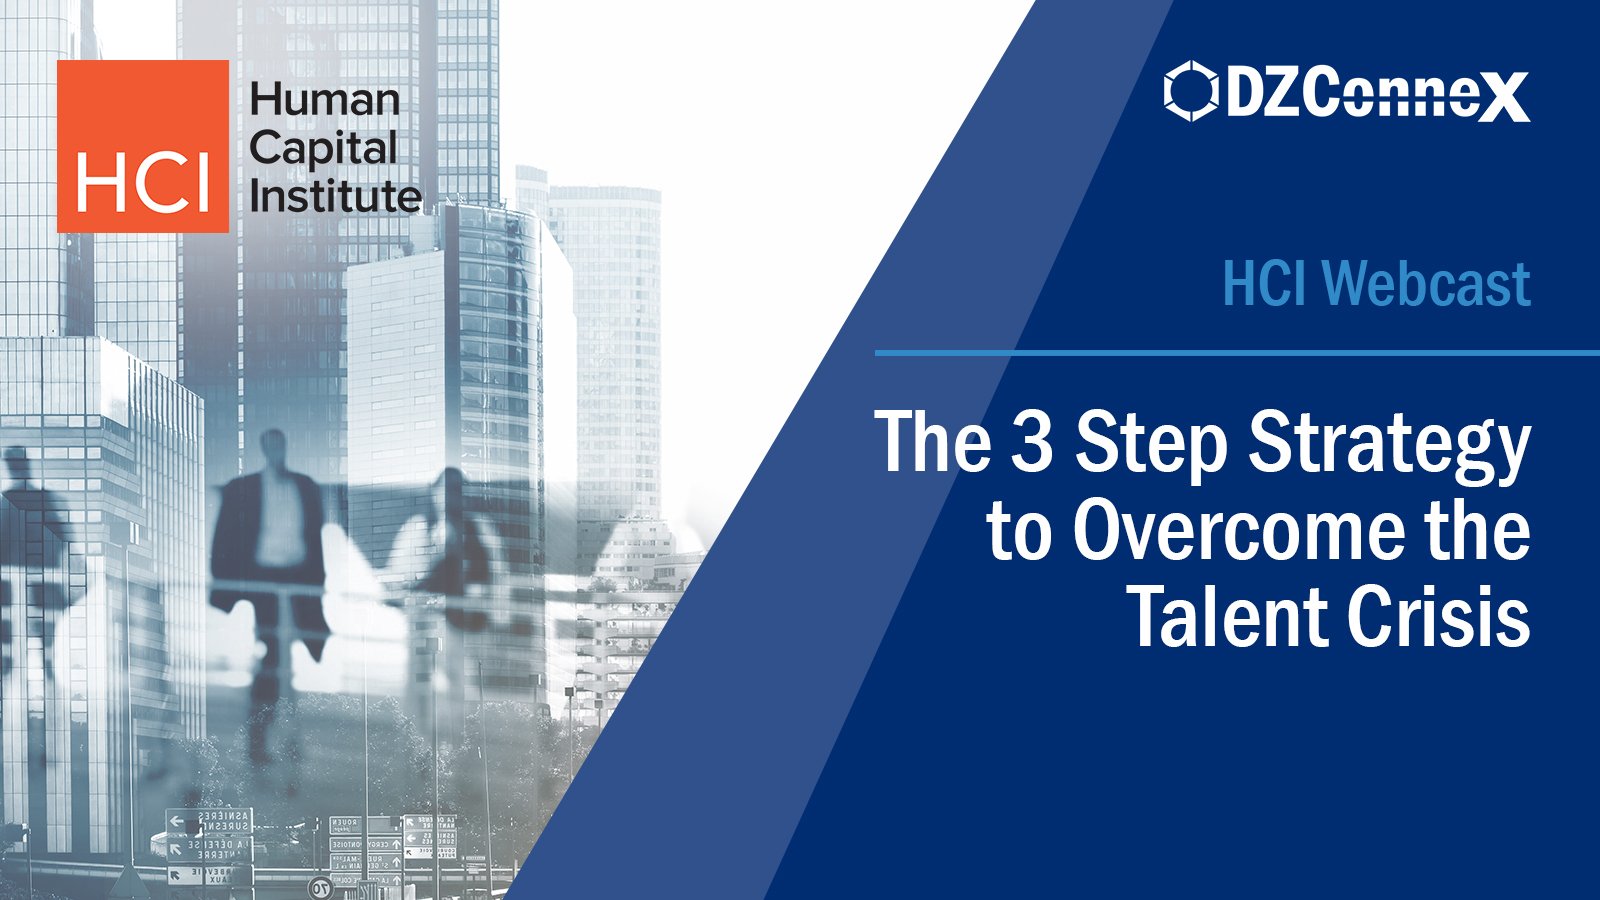 The 3 Step Strategy to Overcome the Talent Crisis 